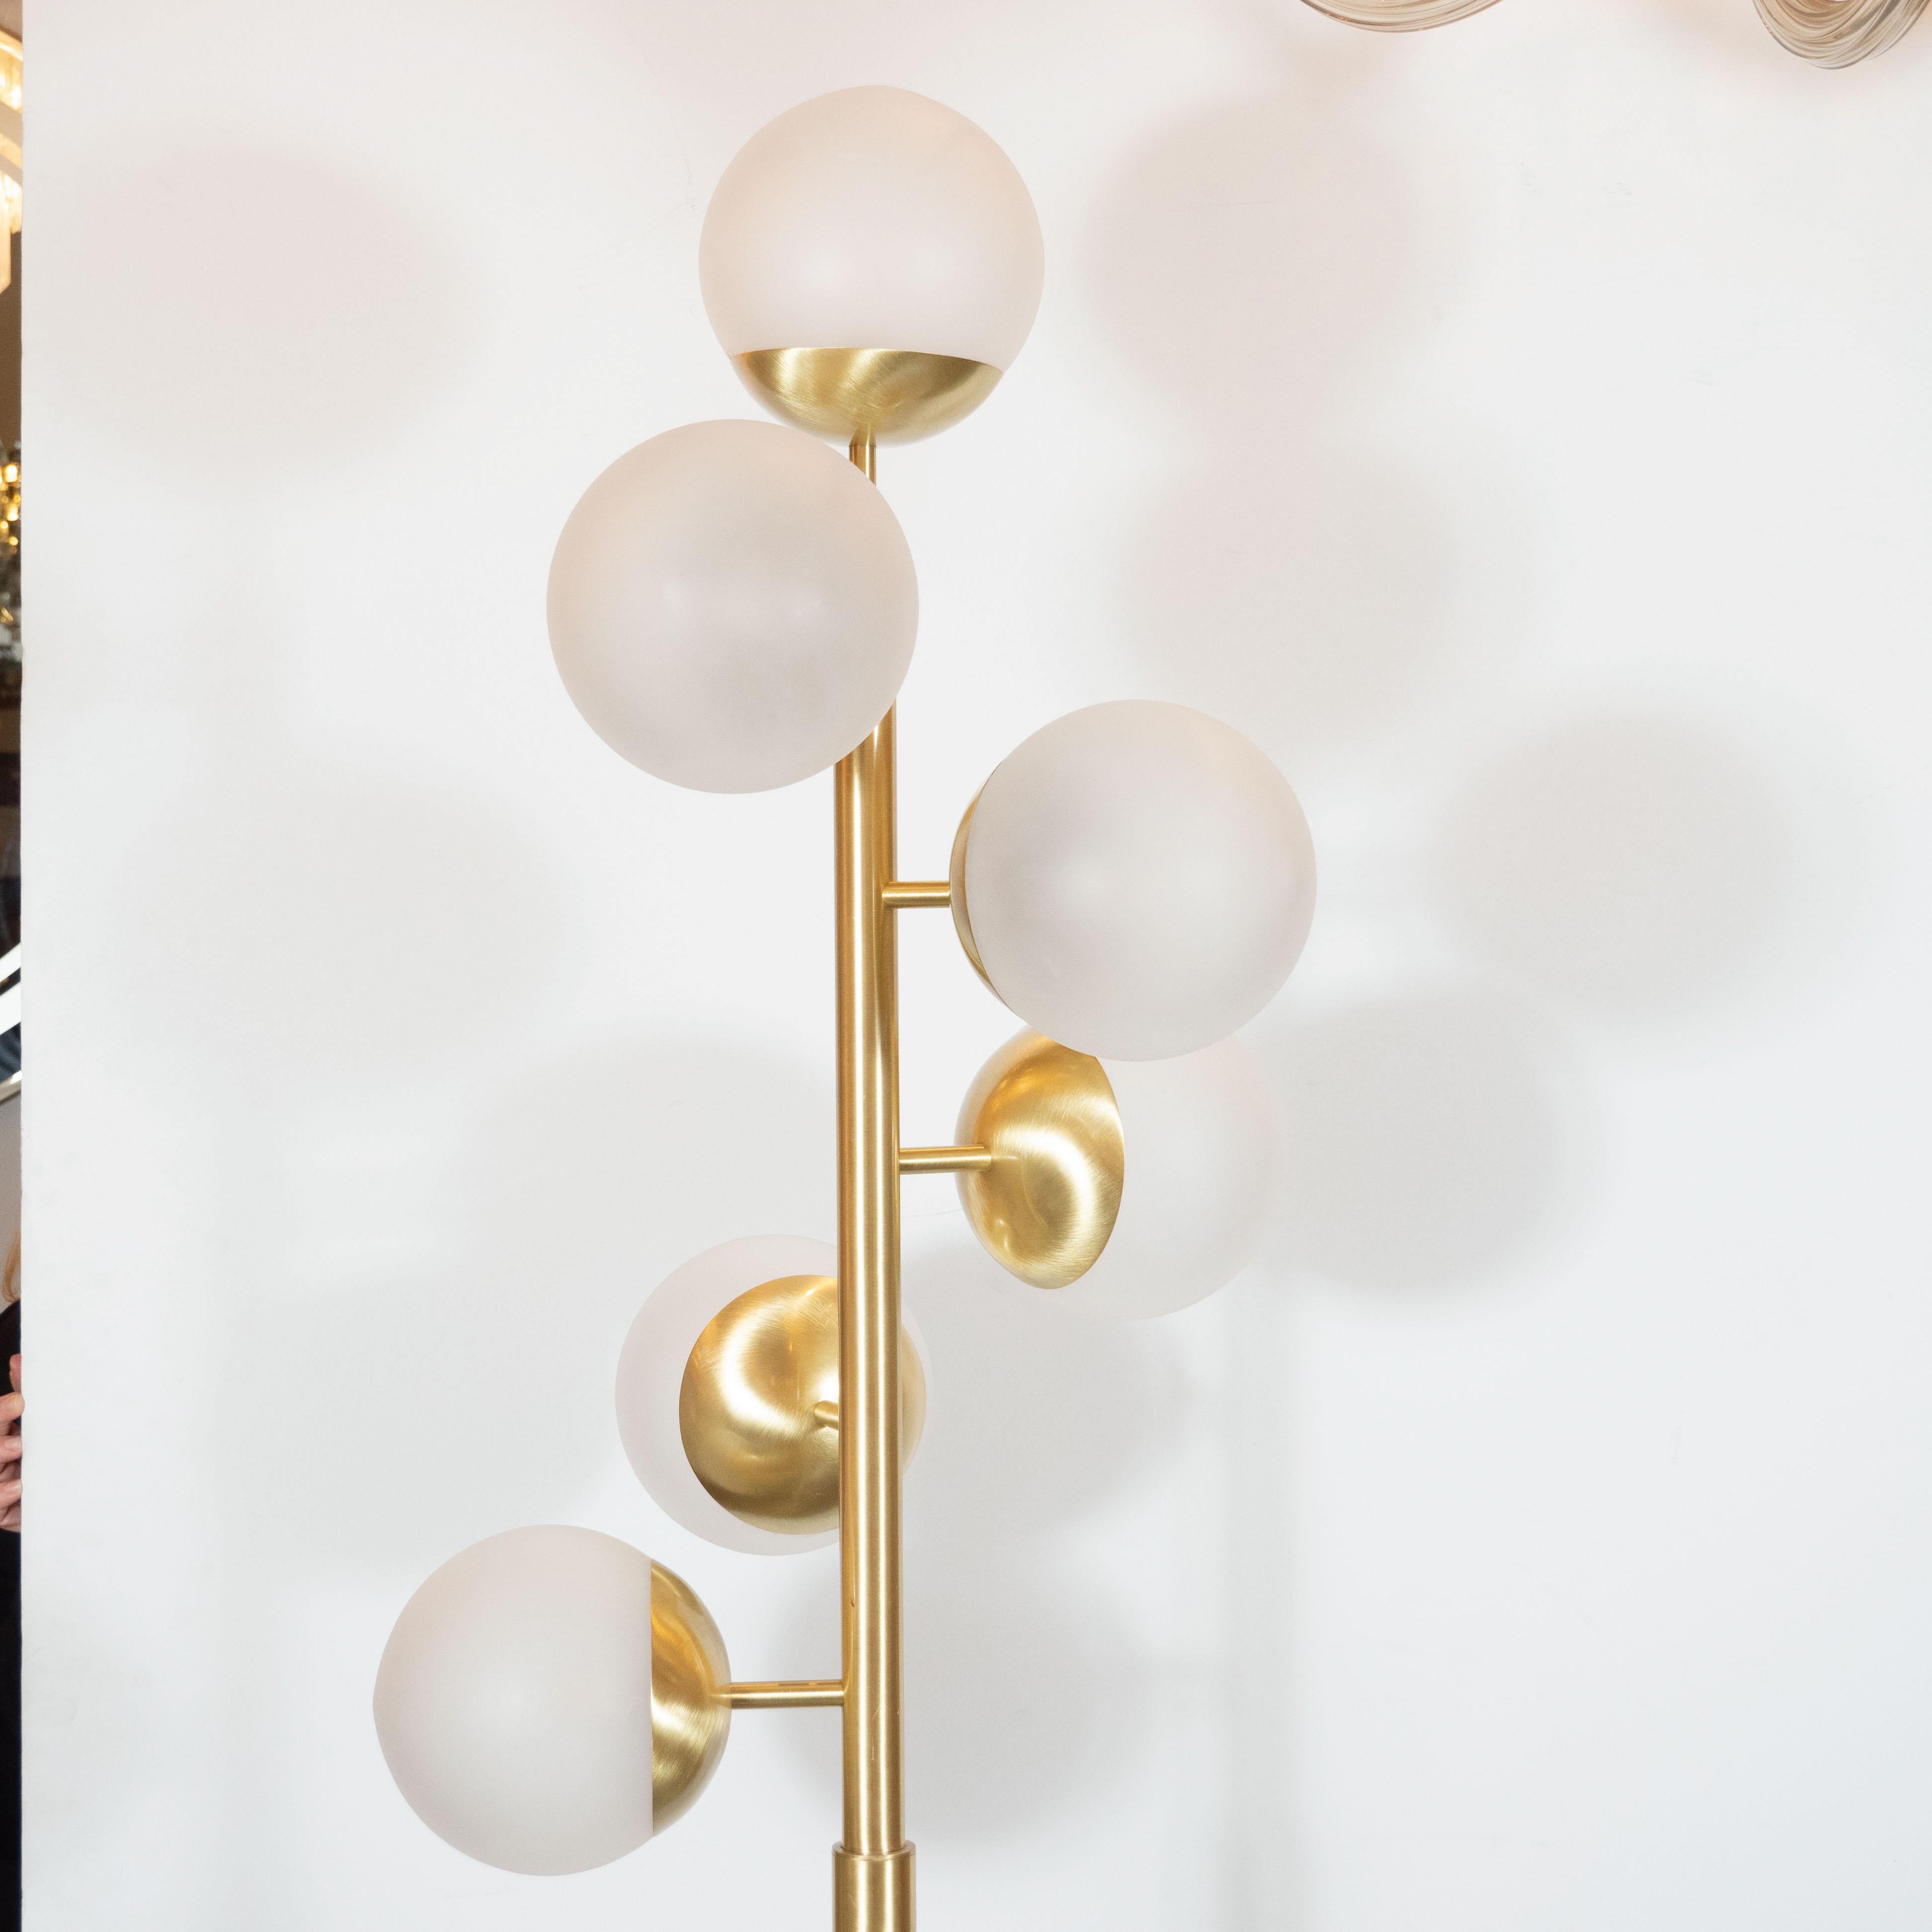 This refined floor lamp was realized in Murano, Italy- the island off the coast of Venice renowned for centuries for its superlative glass production- exclusively for high style deco. It features six frosted glass globes that attach to a cylindrical